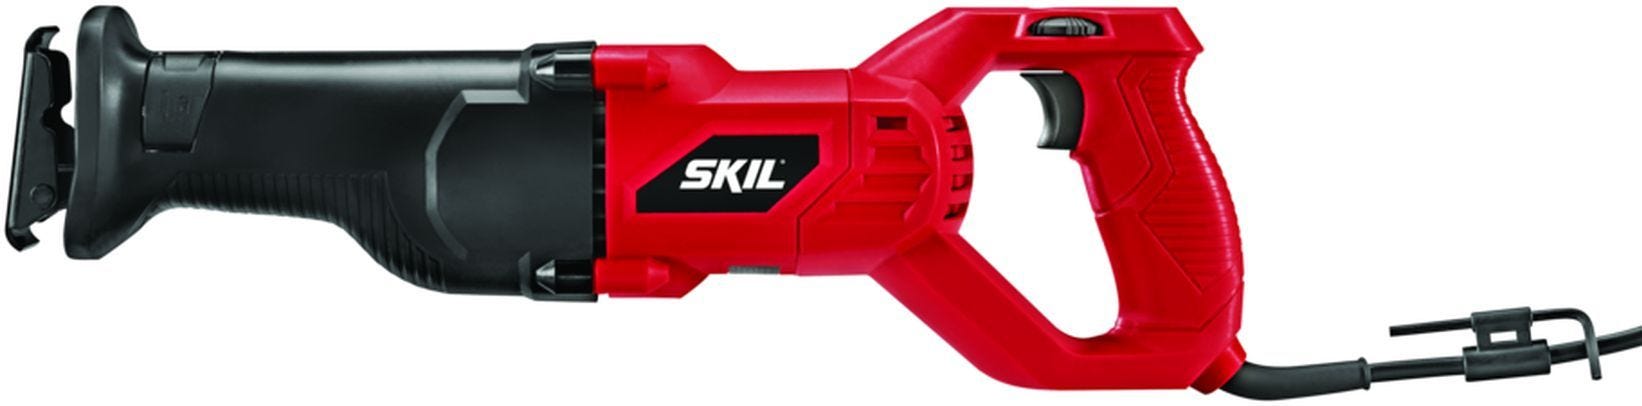 SKIL 9206-02 7.5 Amp Variable Speed Reciprocating Saw